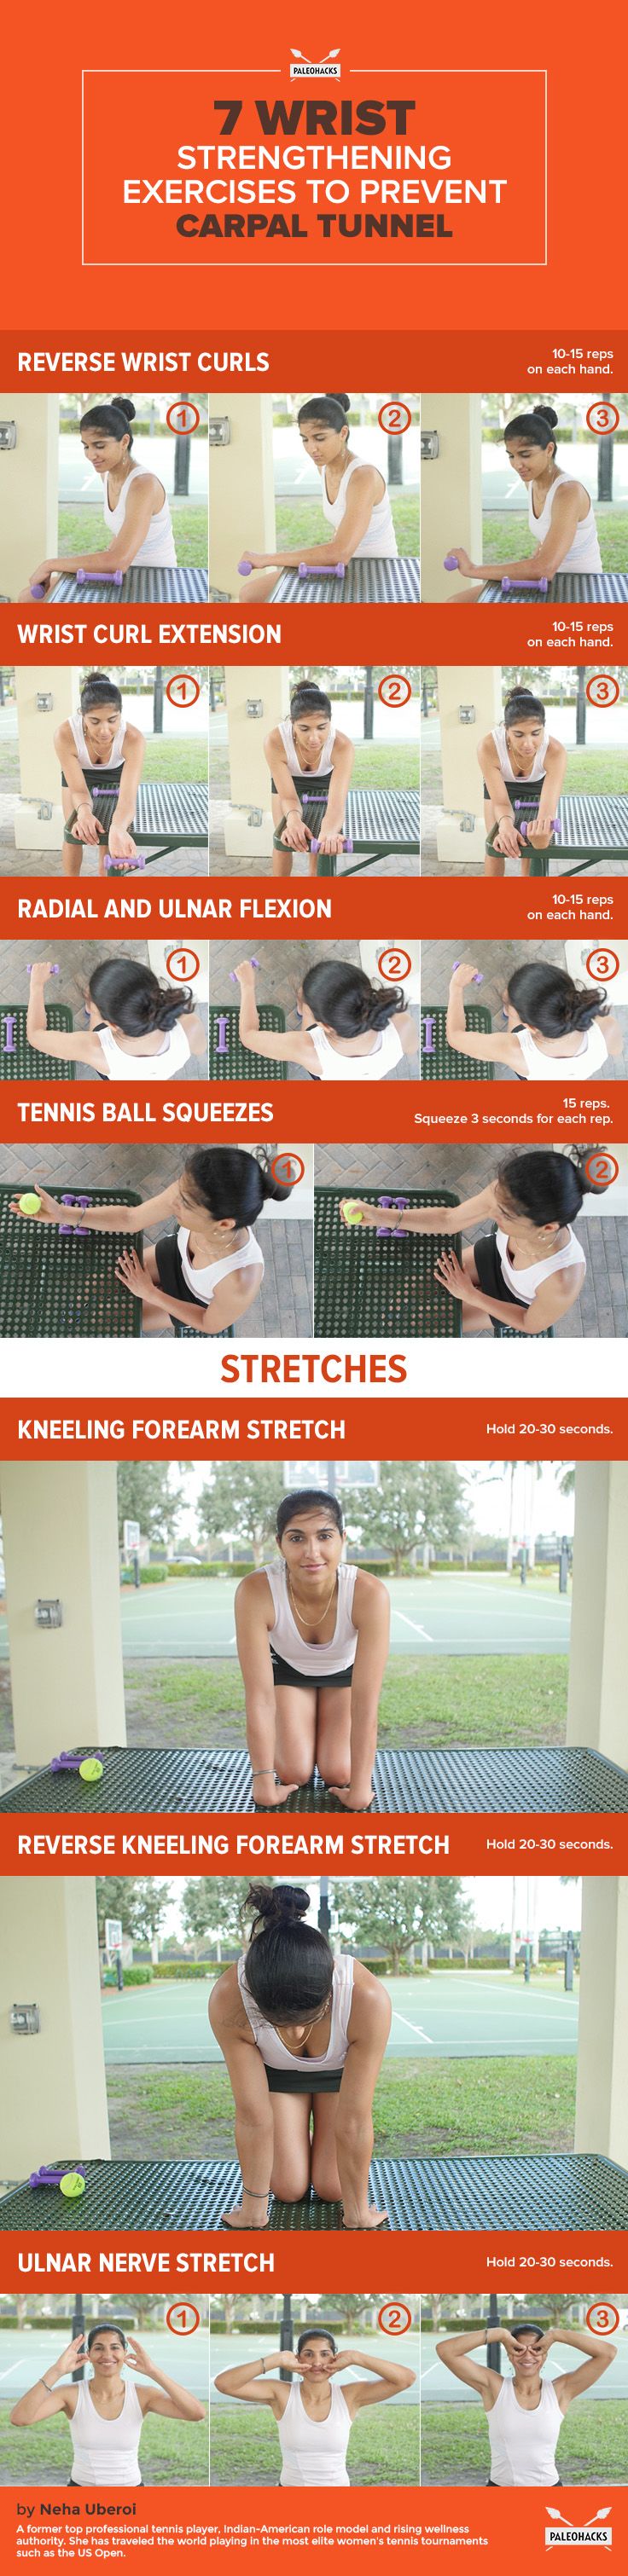 7_Wrist_Strengthening_Exercises_to_Prevent_Carpal_Tunnel_infographic